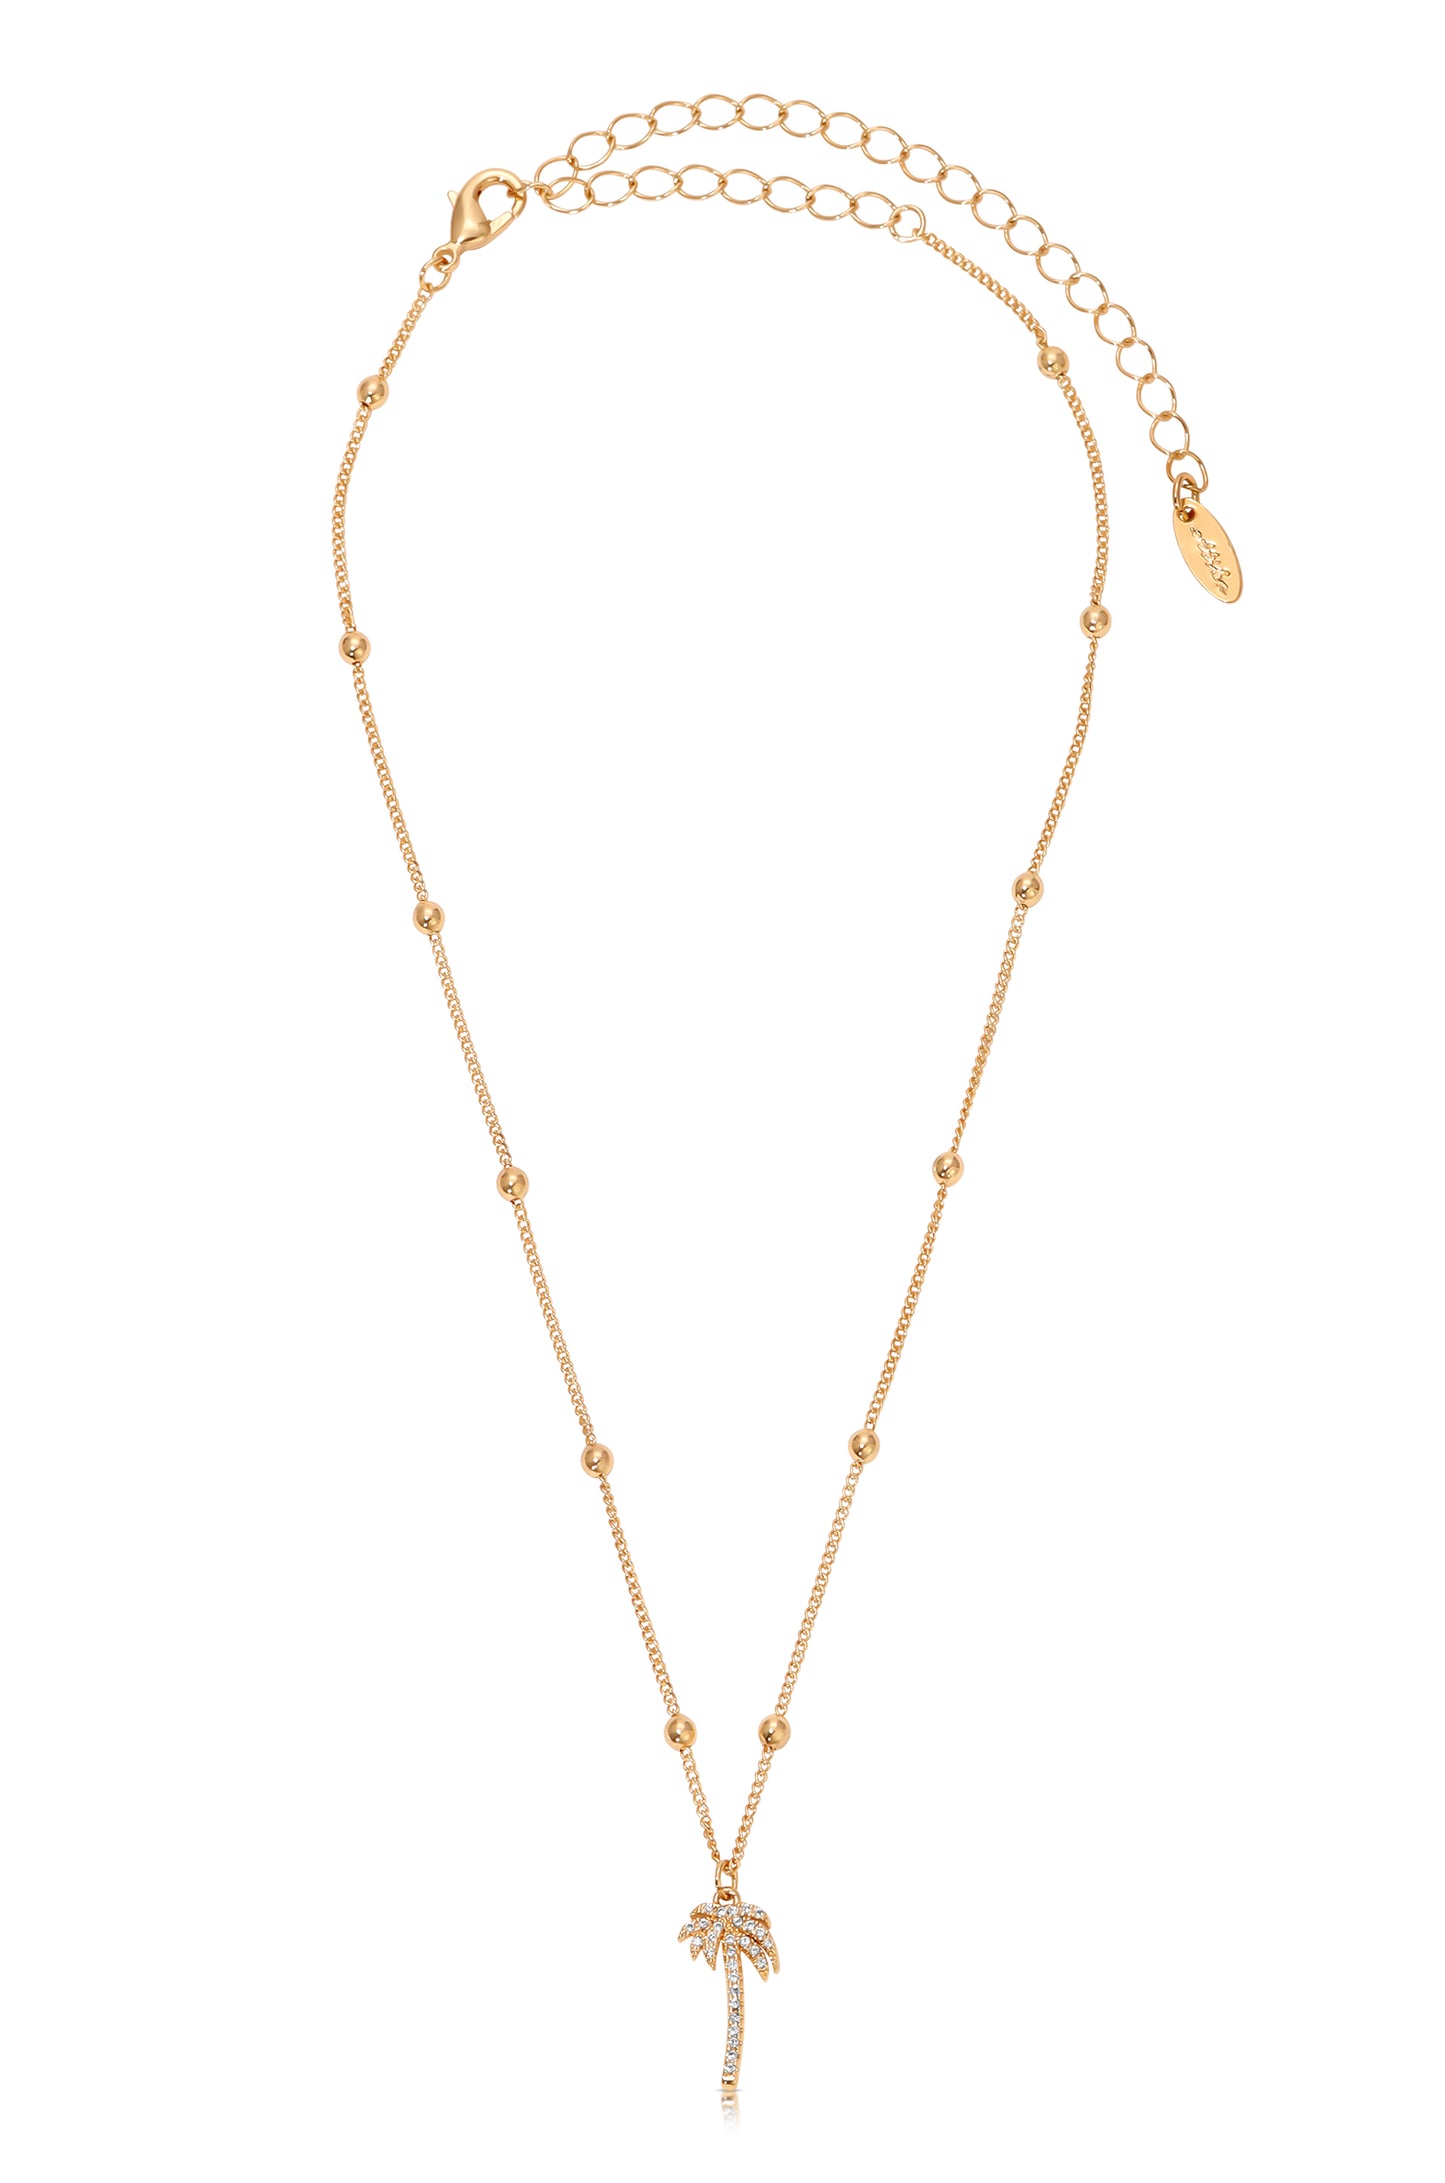 In the Tropics 18k Gold Plated Necklace Set close up